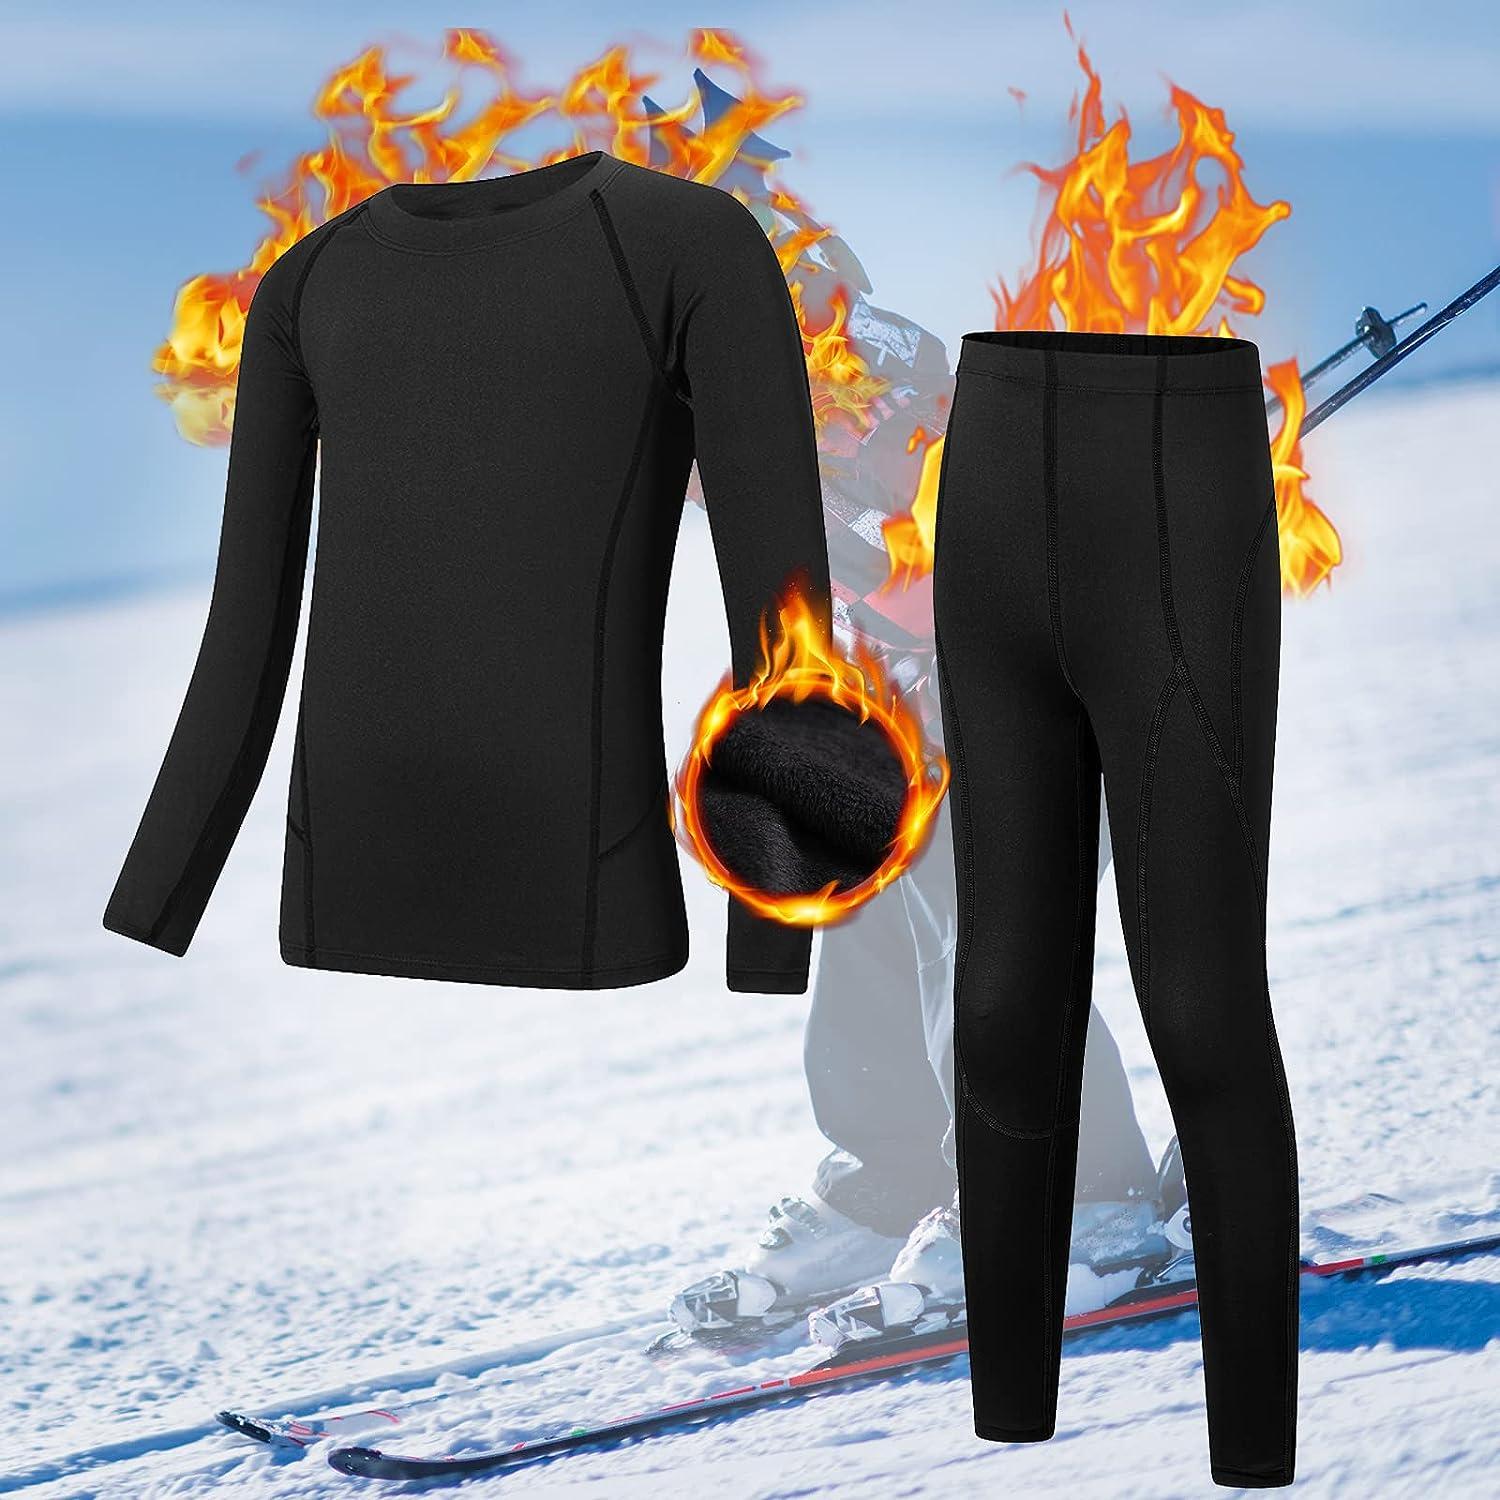 Men's Thermal Underwear Bottoms - Extreme Cold Malaysia